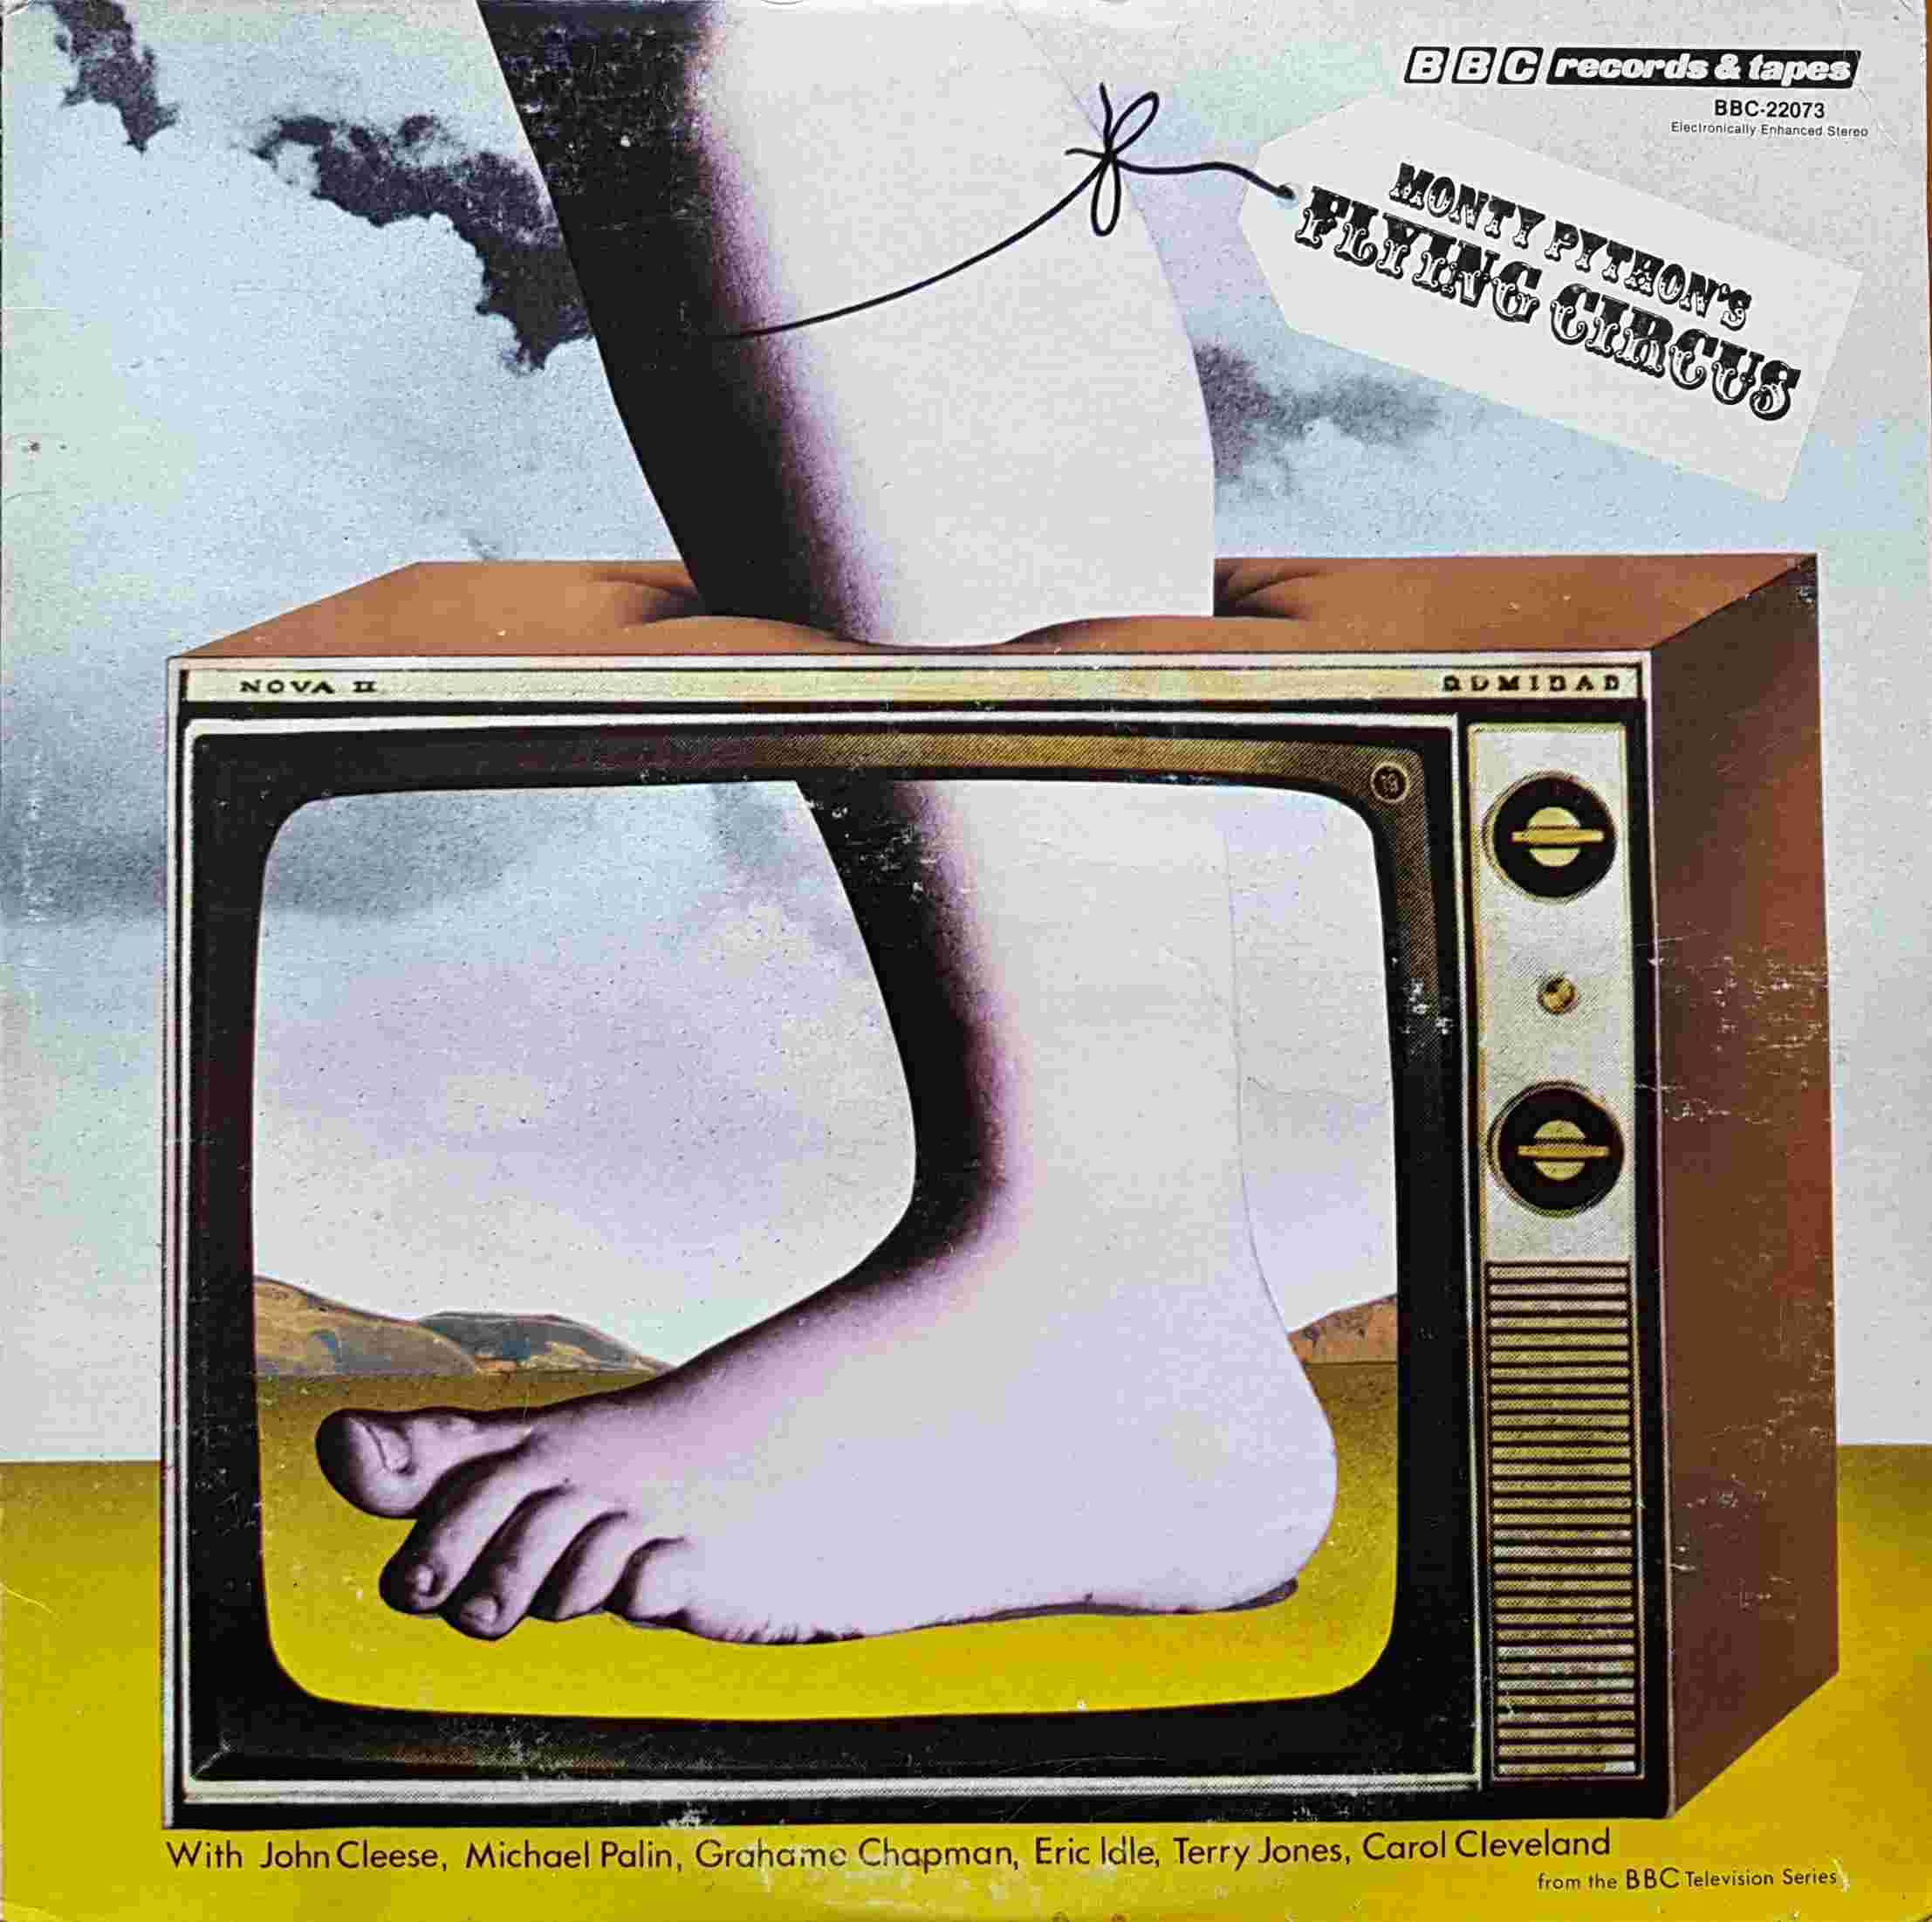 Picture of BBC - 22073 Monty Python's flying circus by artist Monty Python from the BBC albums - Records and Tapes library